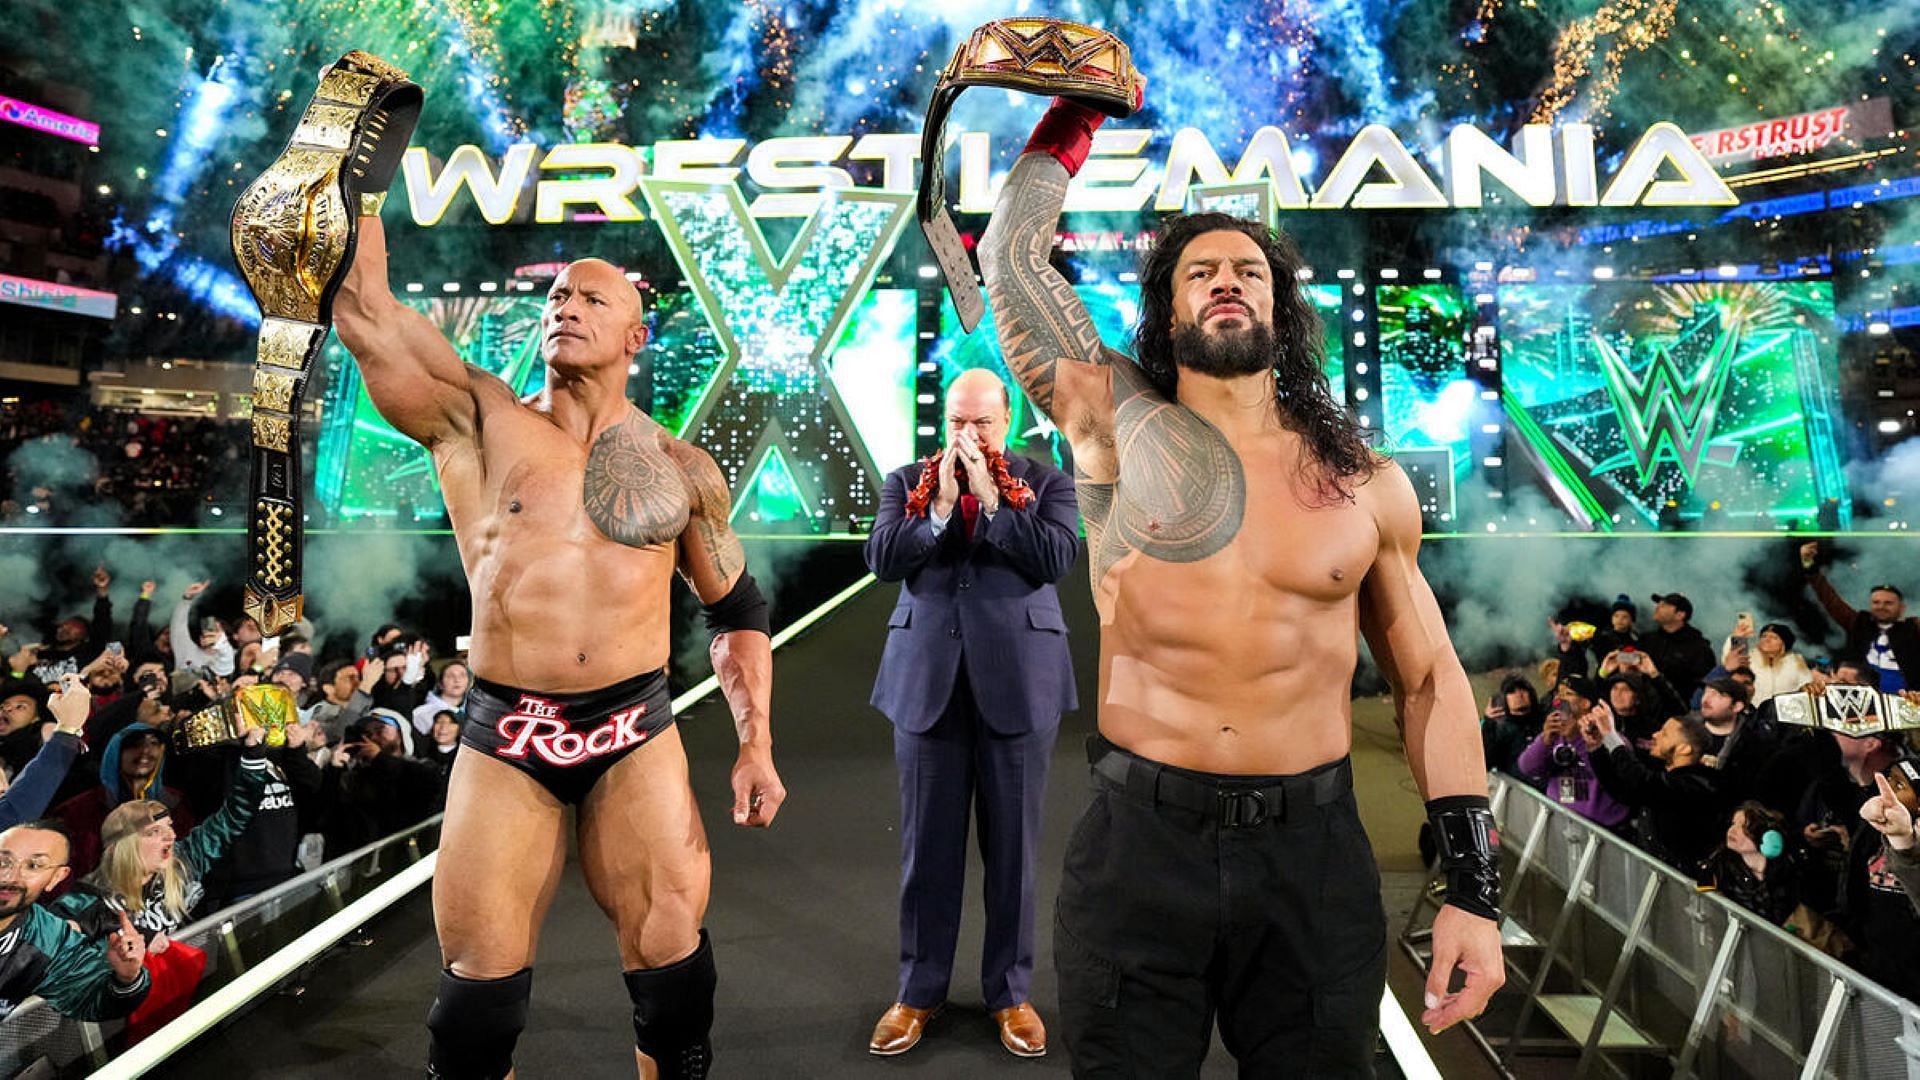 The Rock and Roman Reigns are known all across the globe.